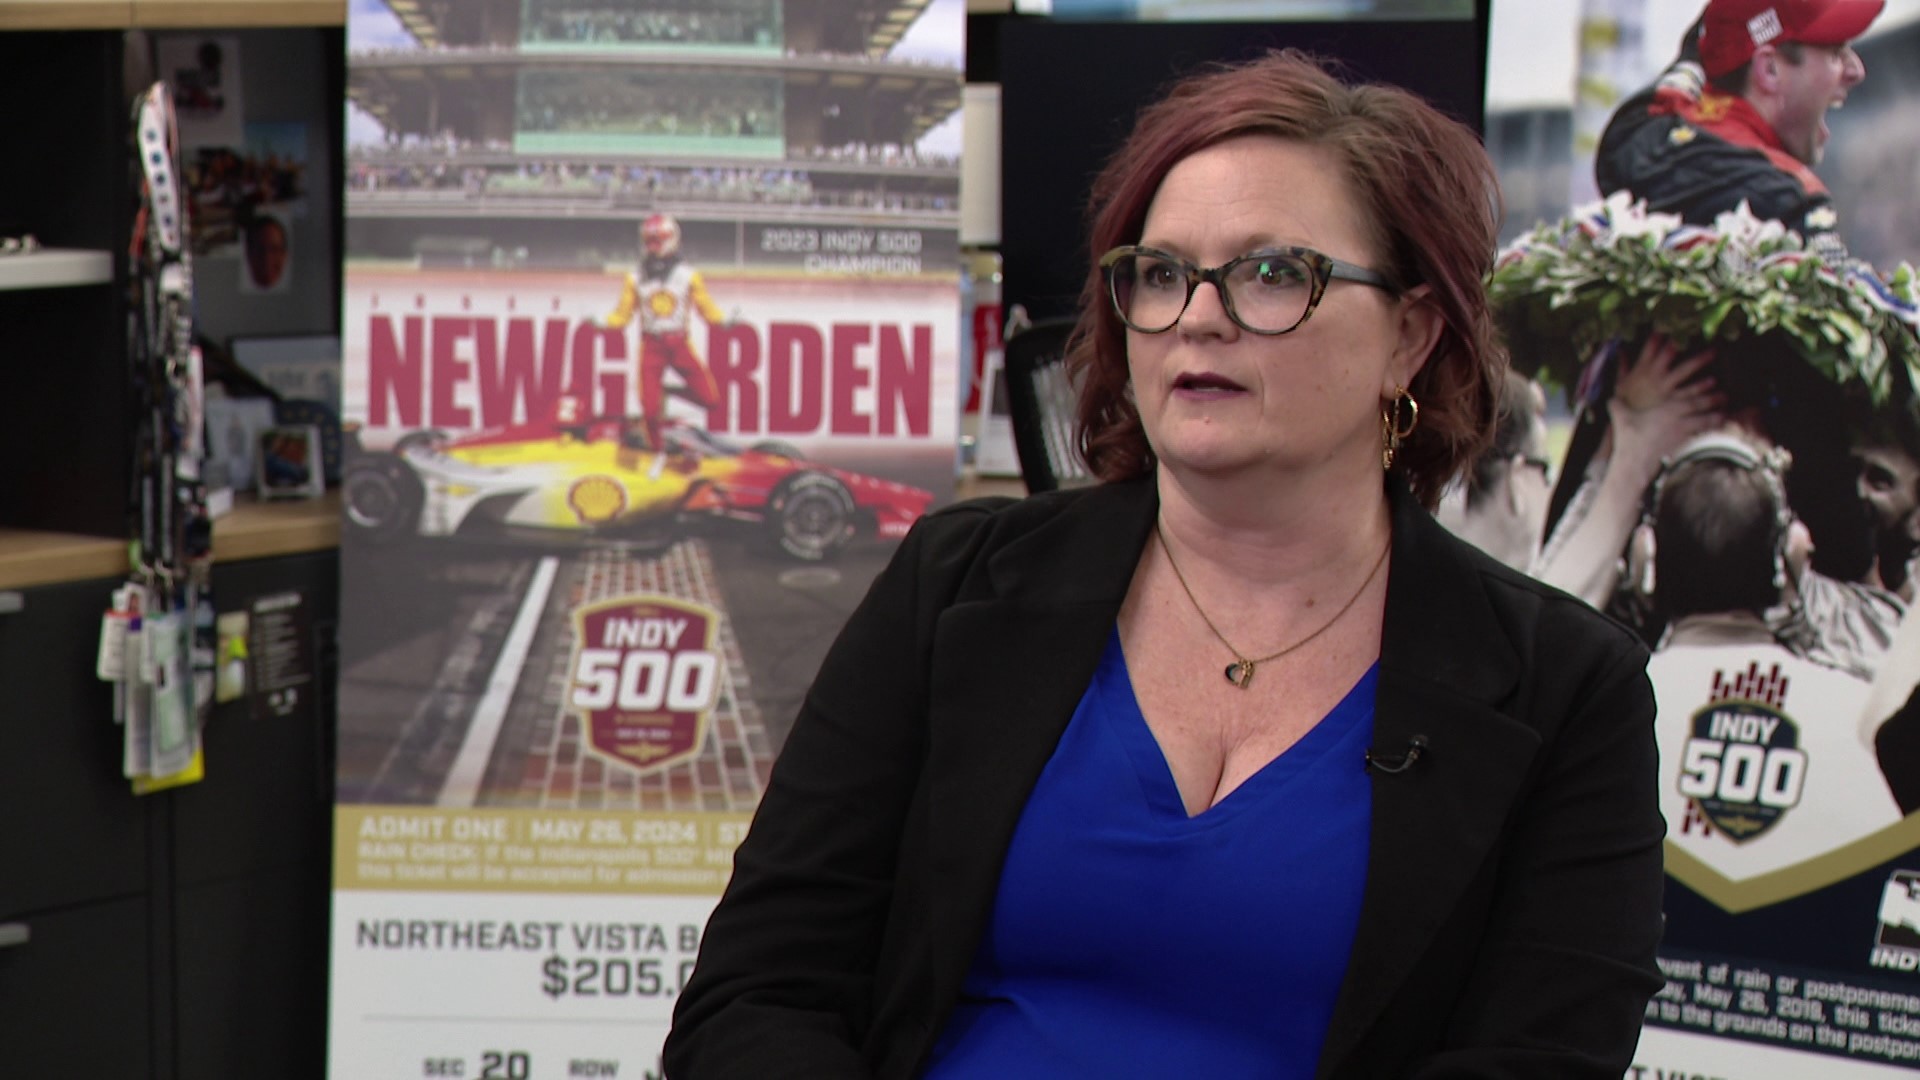 Meet Mandy Walsh, the designer of Indianapolis 500 tickets.